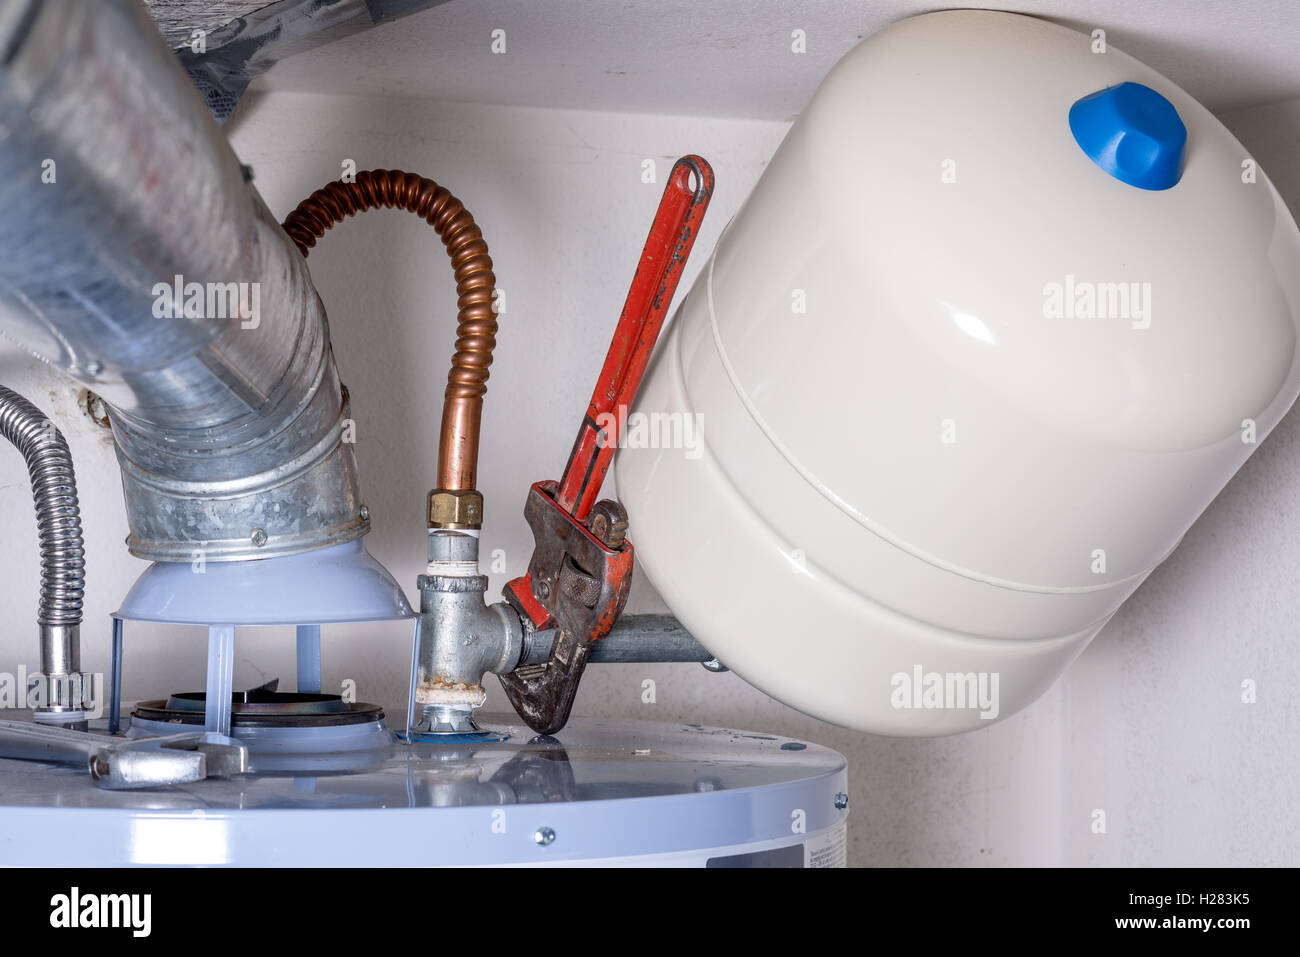 Maintenance on a hot water heater compression tank Stock Photo